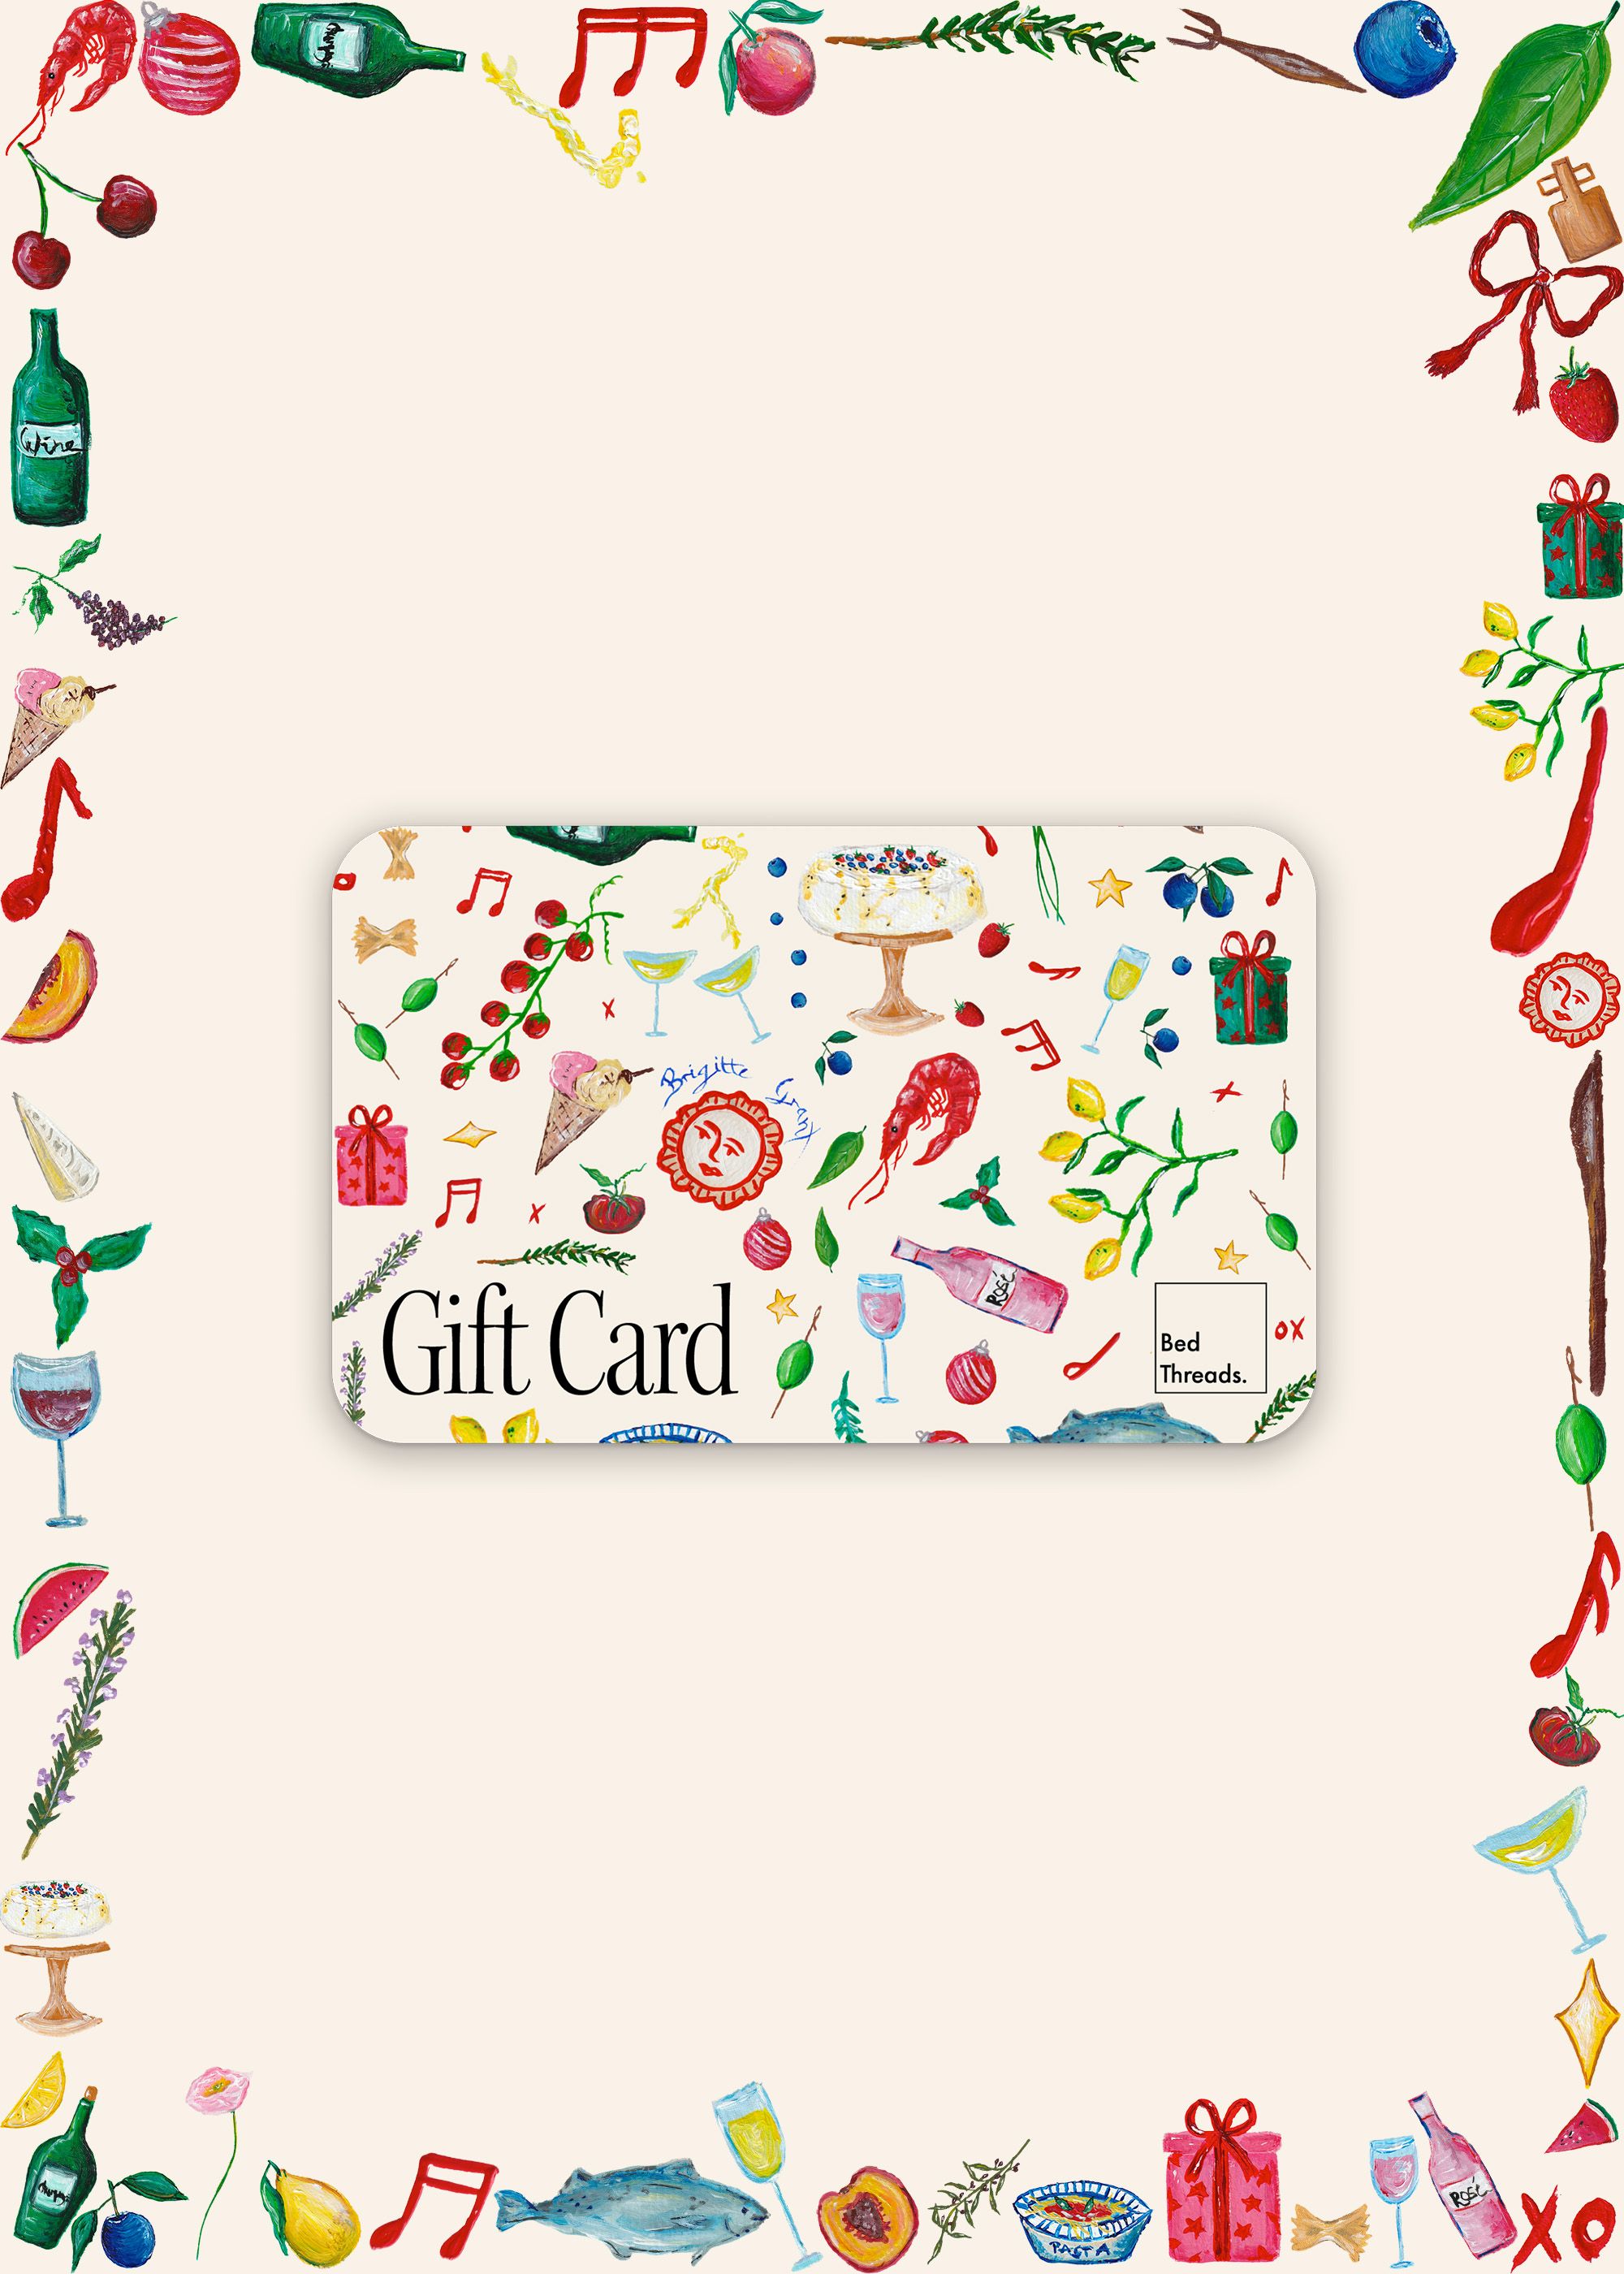 NZD $100 Gift Card Gift Voucher (Digital Card sent by Email) — Anime House